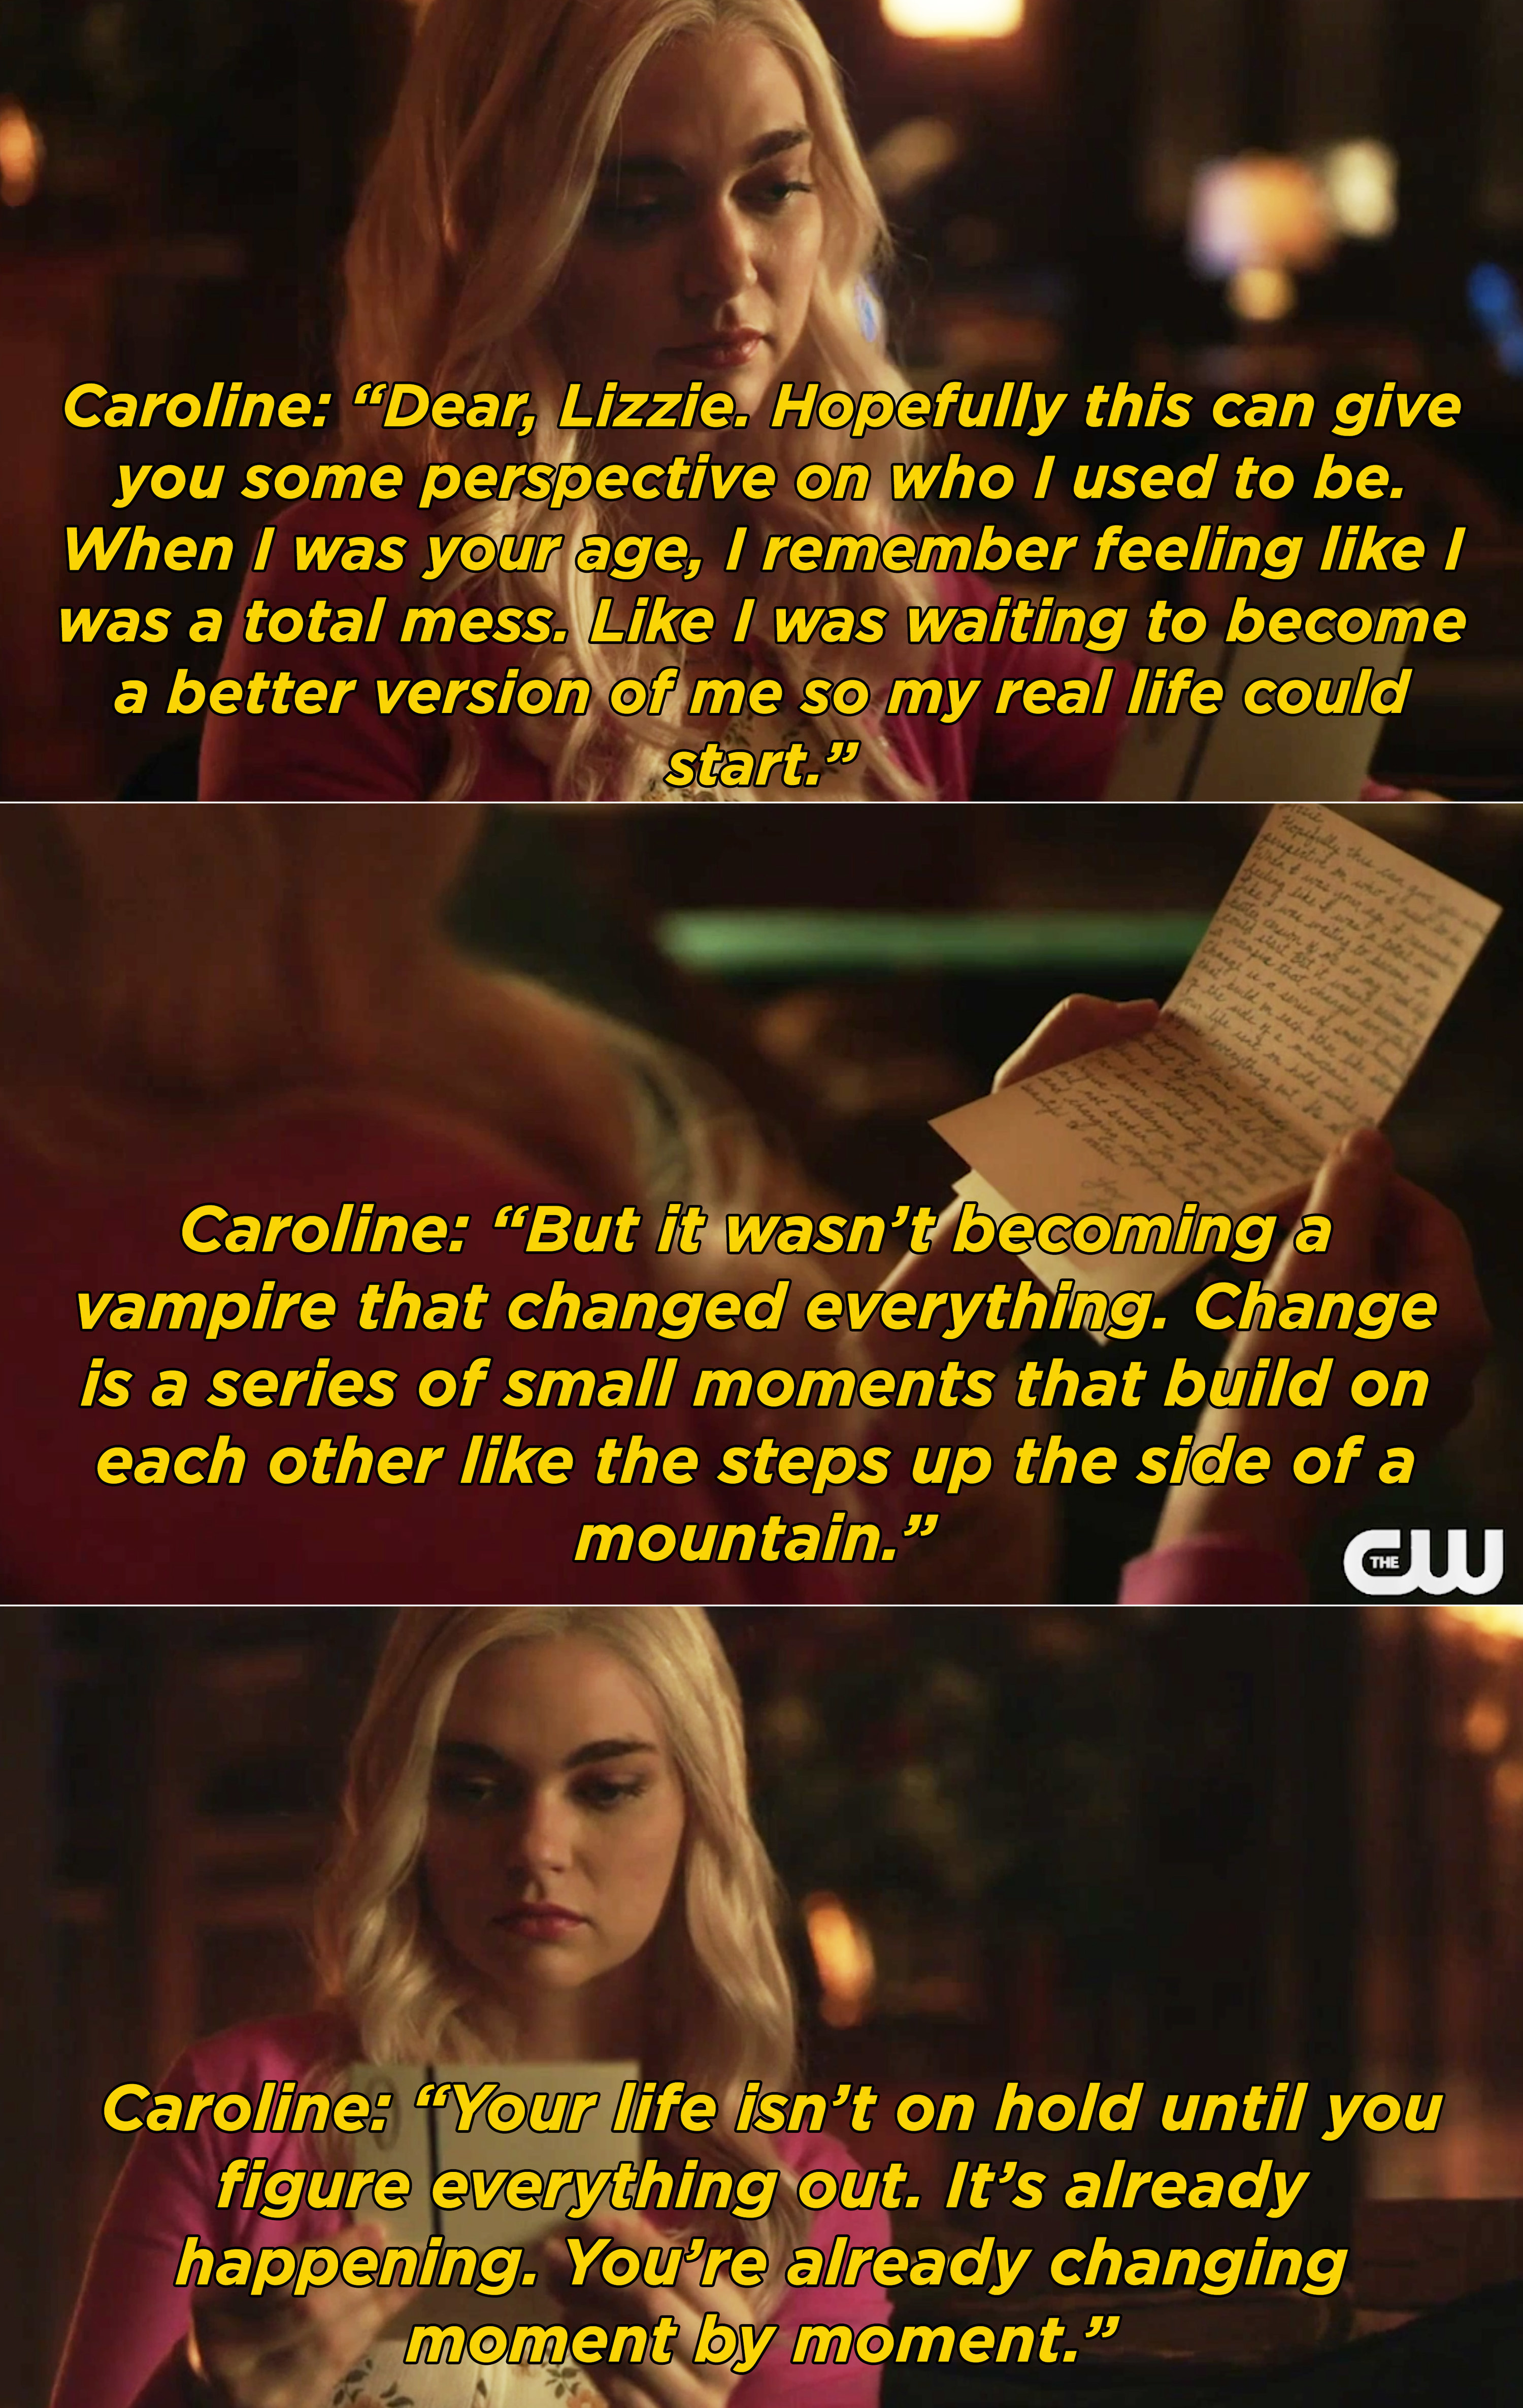 Caroline&#x27;s letter to Lizzie saying that her life didn&#x27;t change when she became a vampire, but rather she grew and changed, and Lizzie is doing the same thing